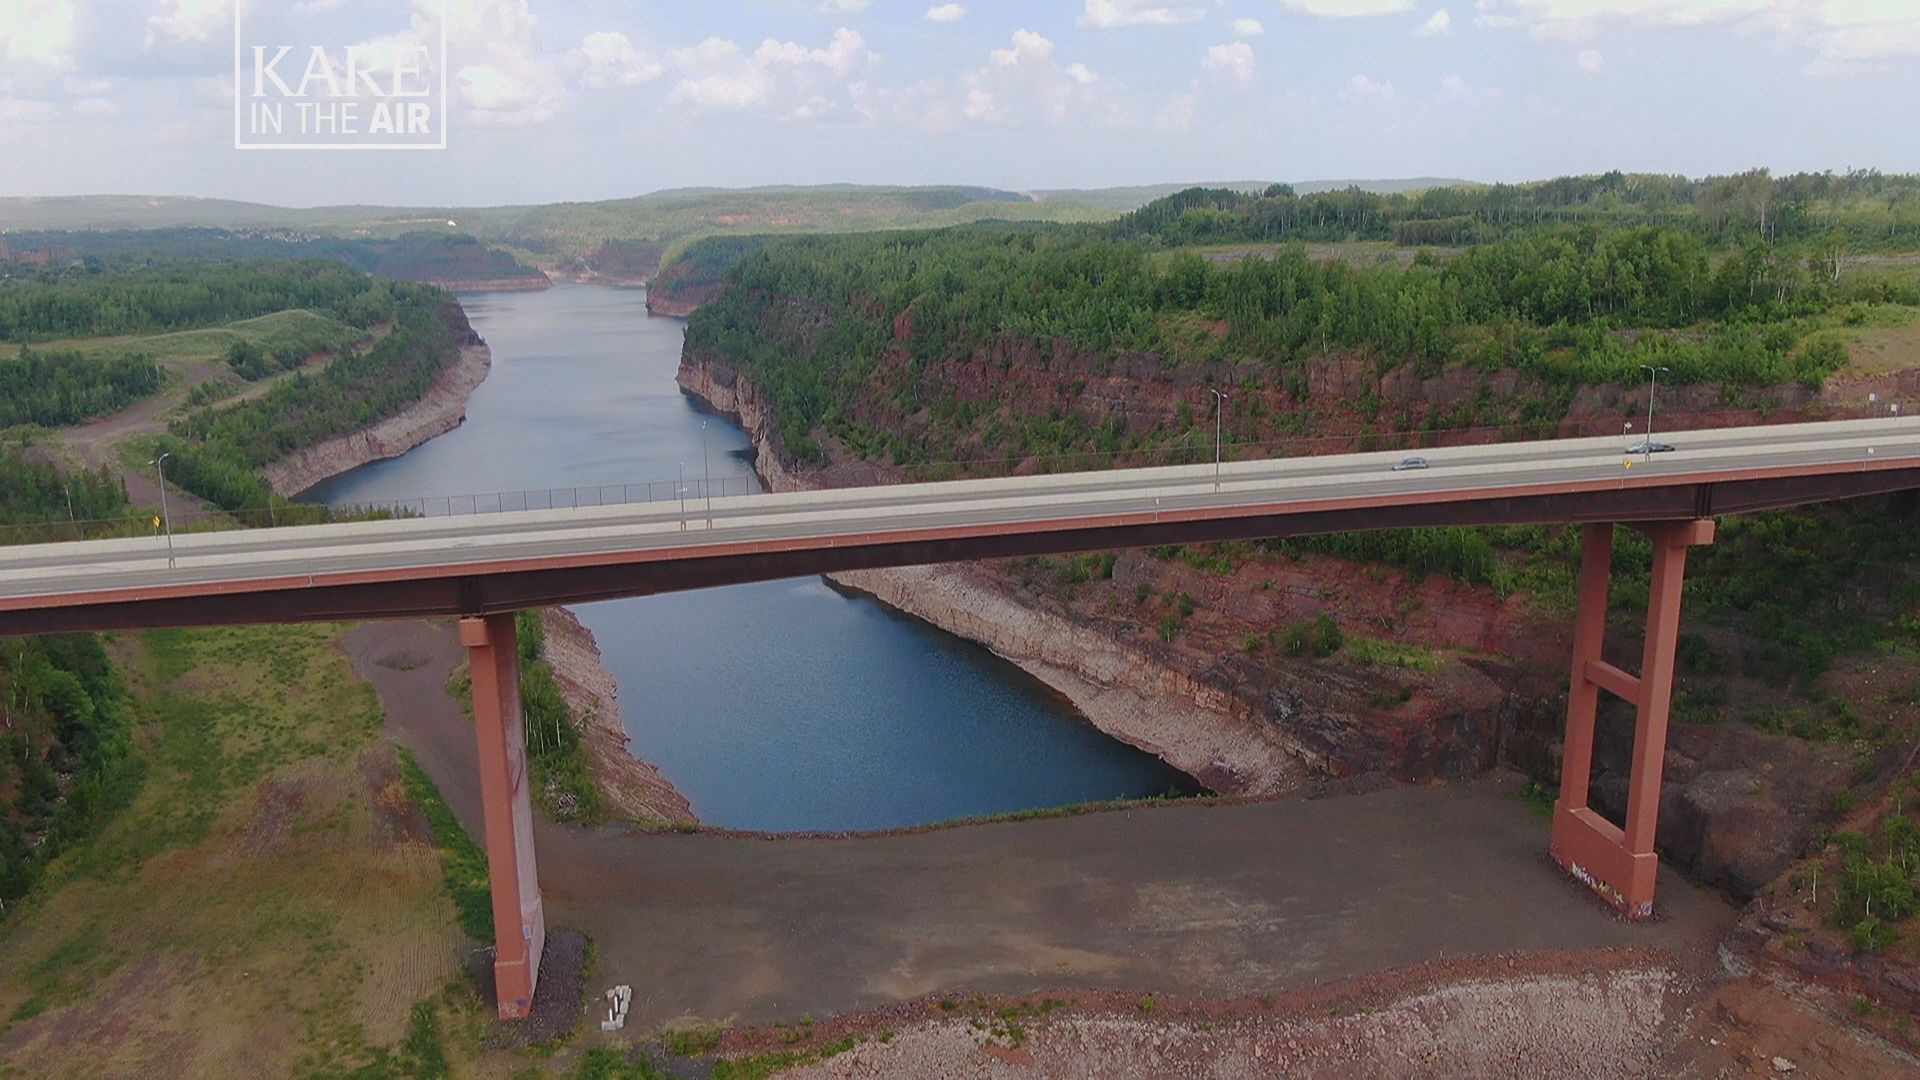 The Thomas Rukavina Memorial Bridge towers 204 feet in the air, spanning a water-filled mine pit near Virginia.